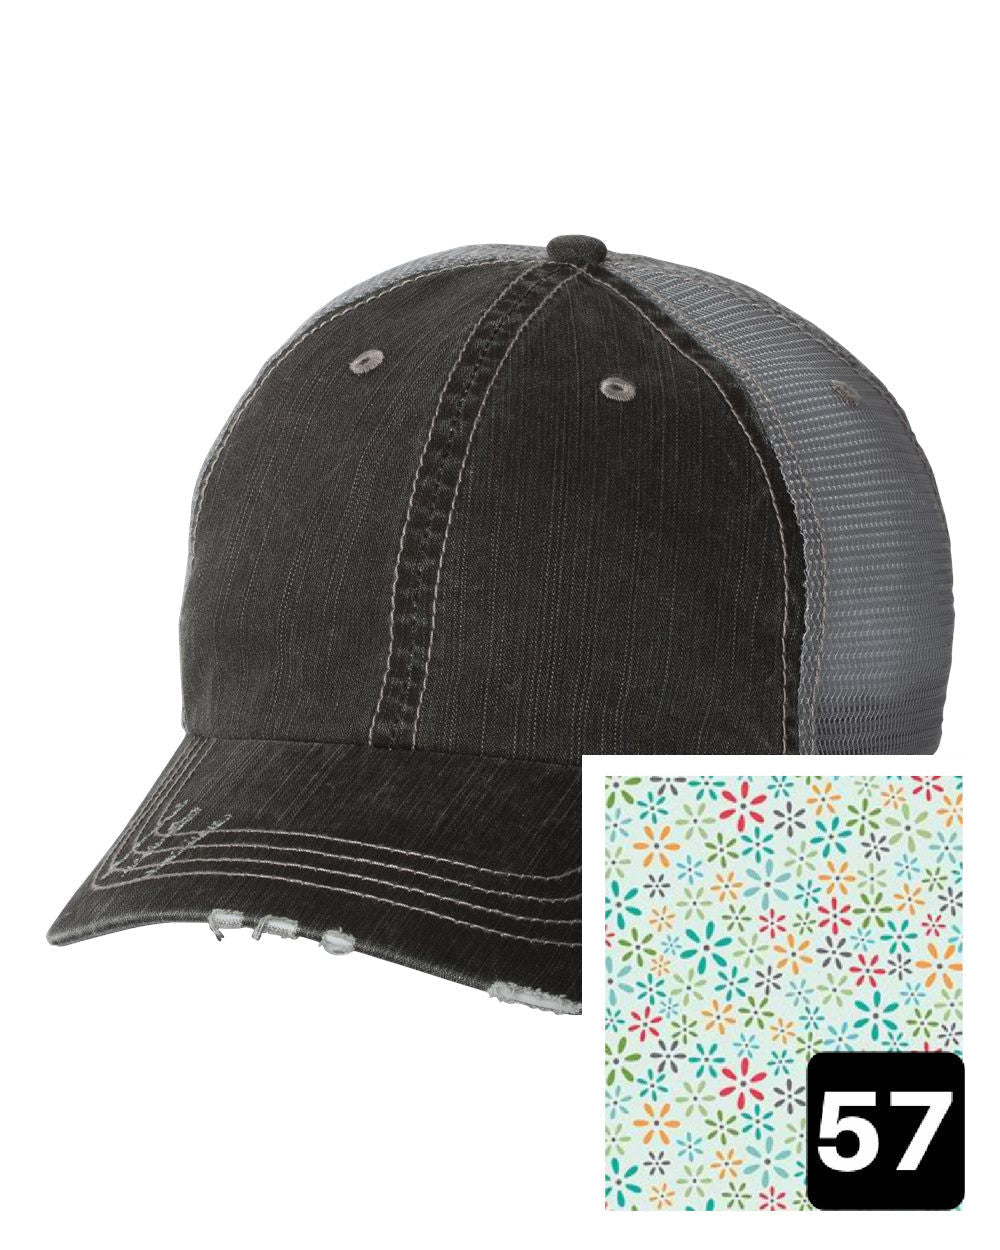 gray distressed trucker hat with white daisy on yellow fabric state of Connecticut